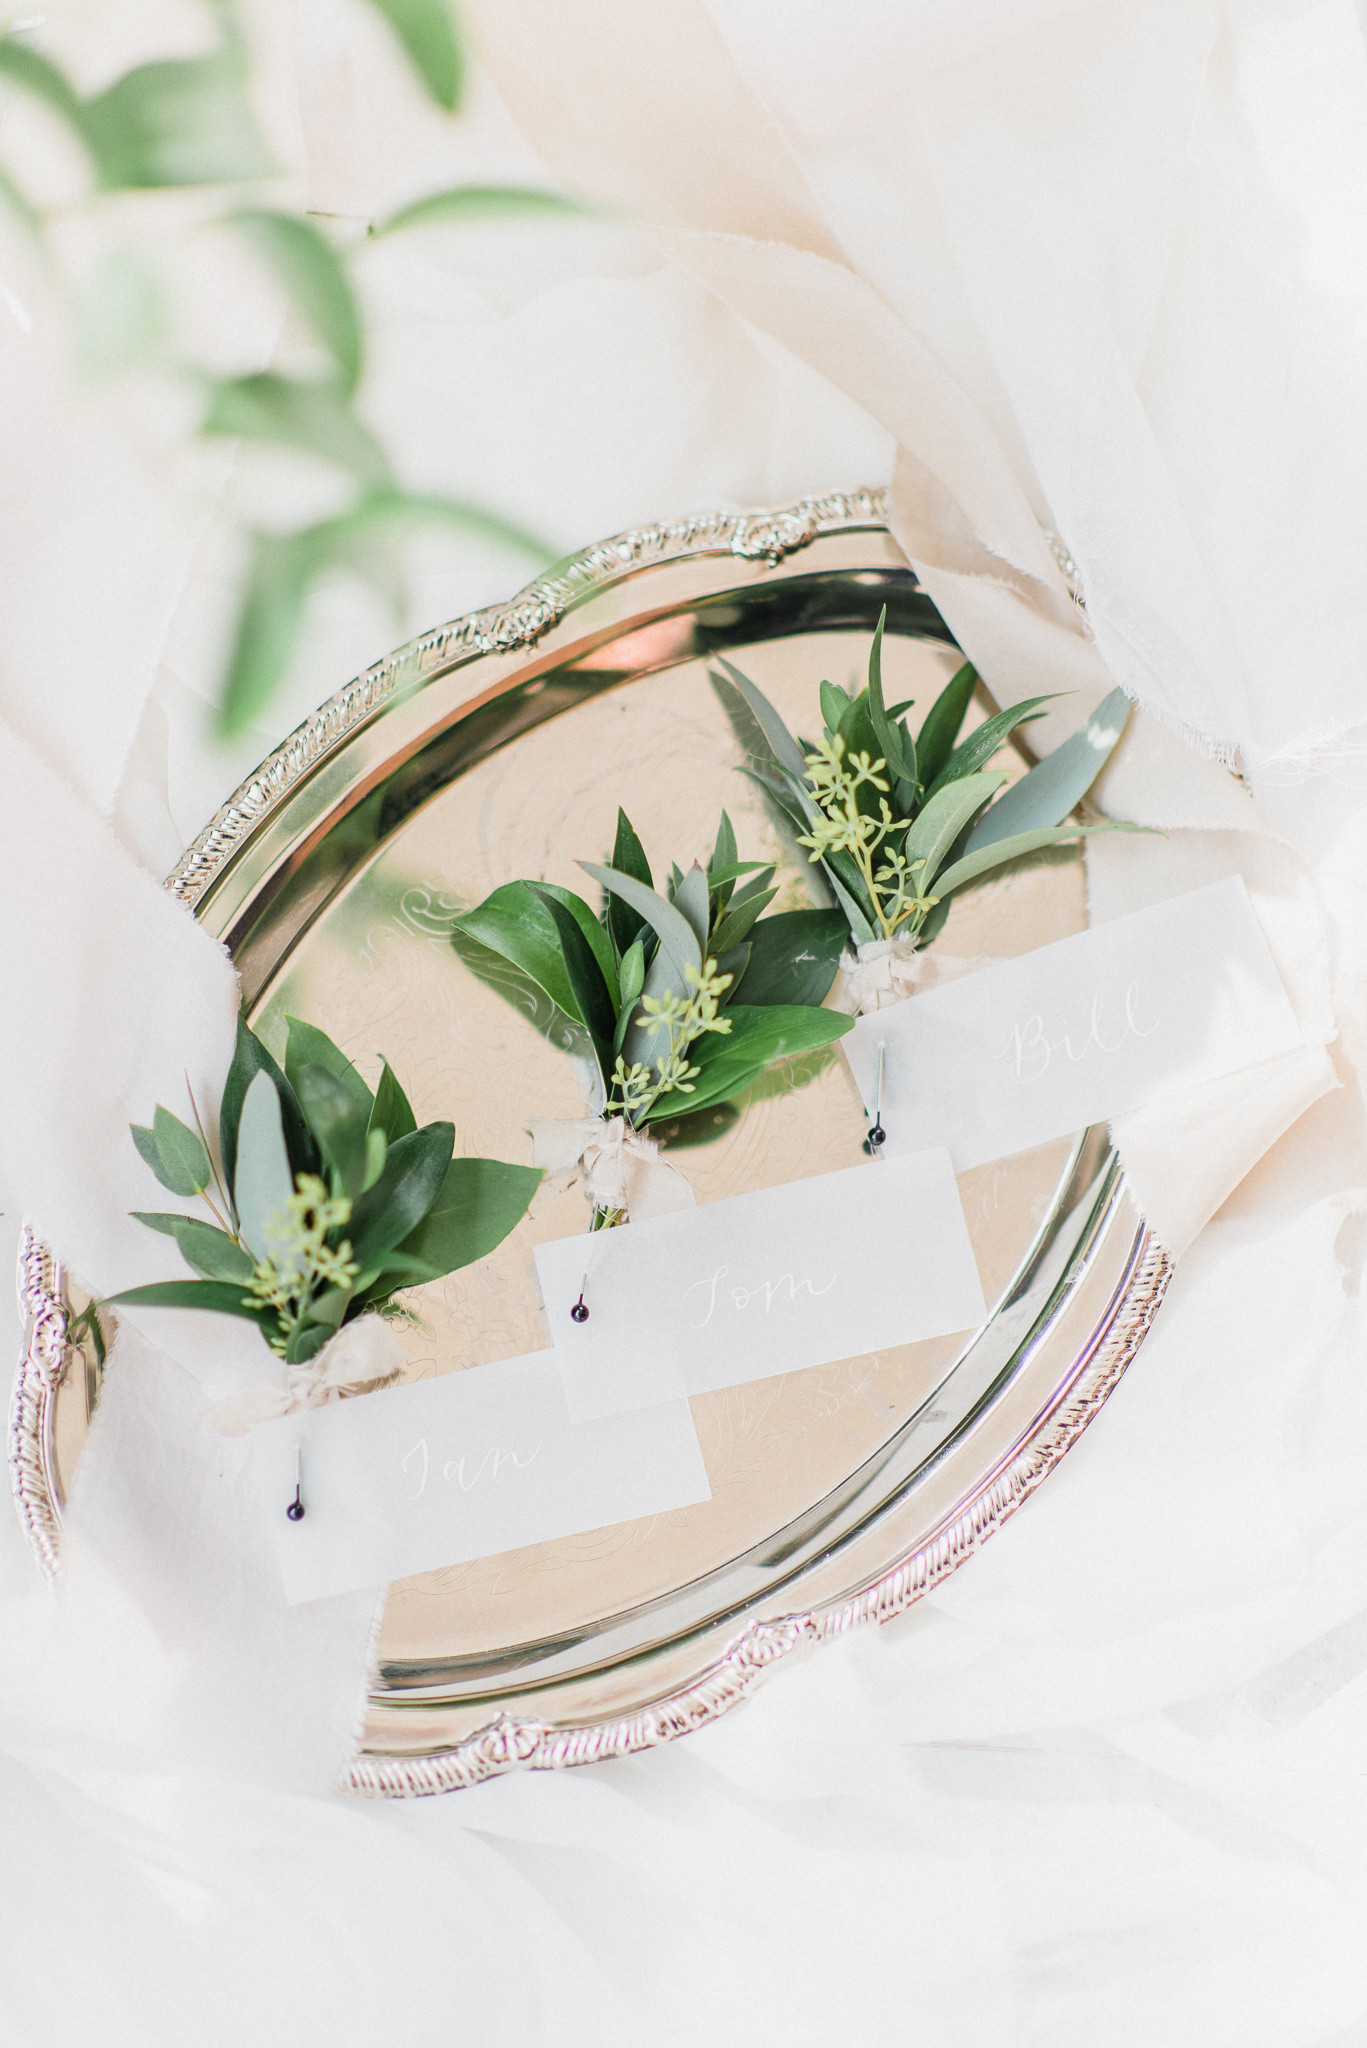 Bright and airy bridal details by Jenn Kavanagh Photography